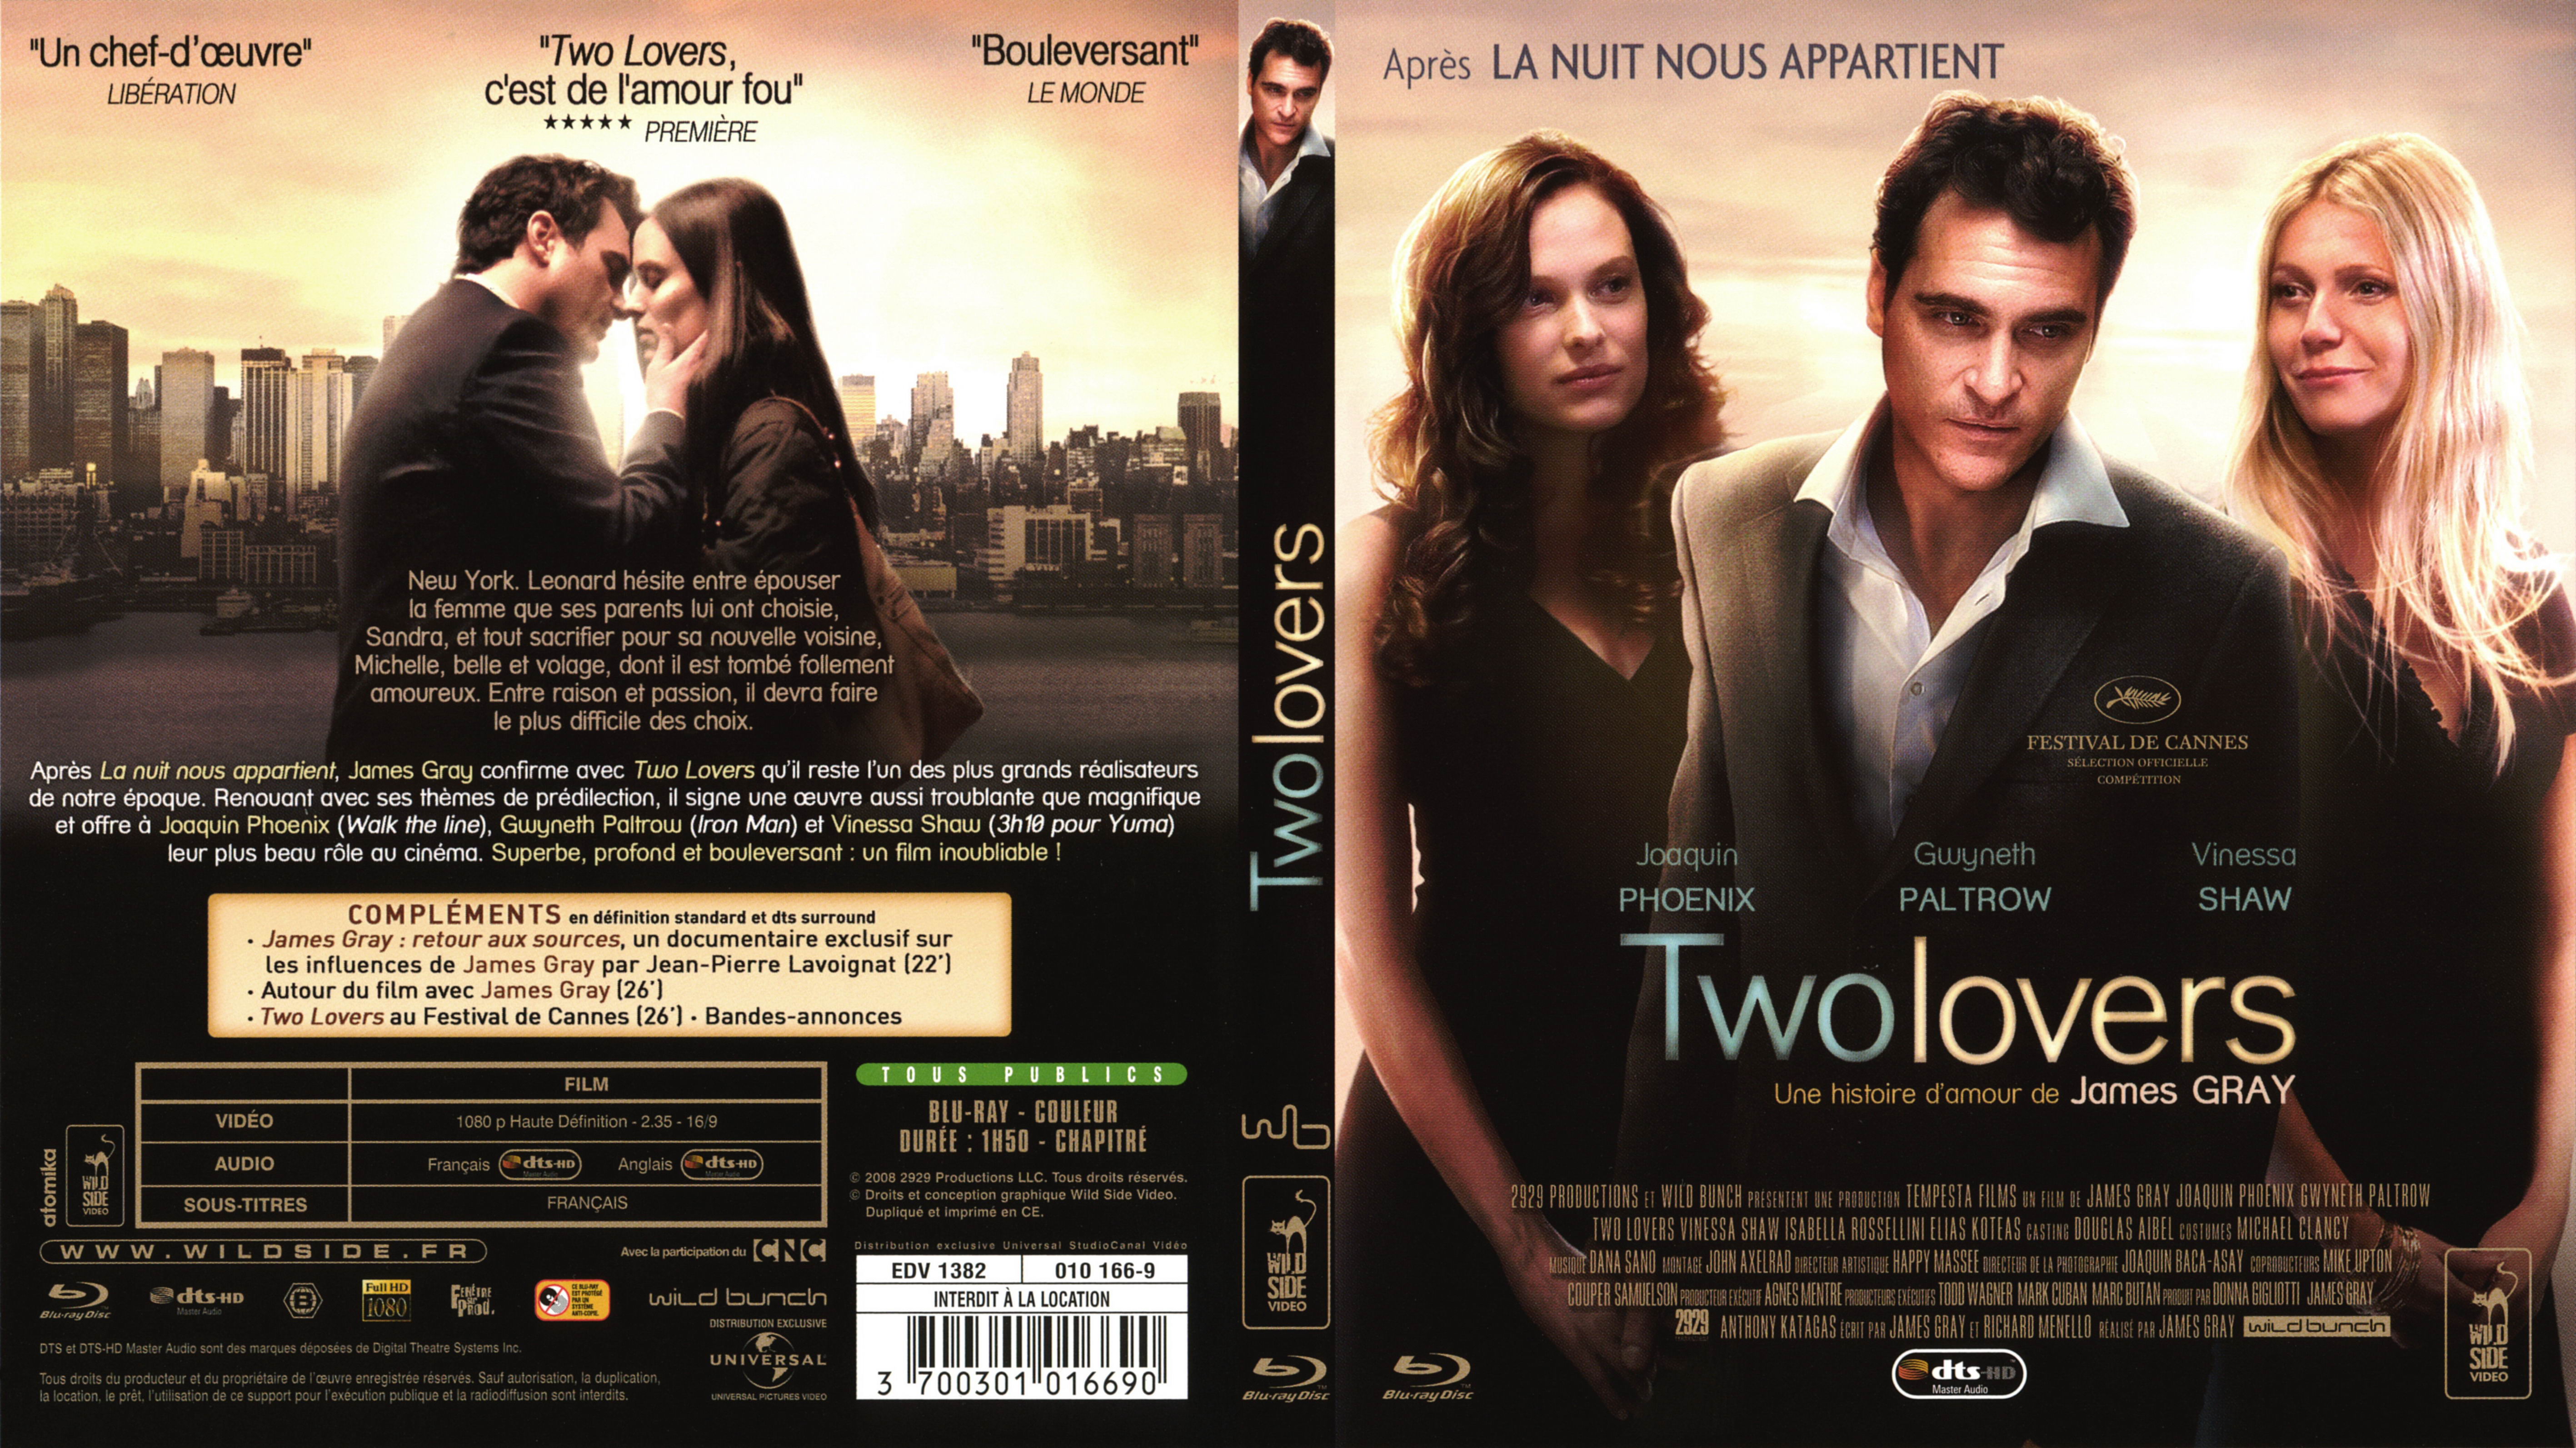 Jaquette DVD Two Lovers (BLU-RAY)